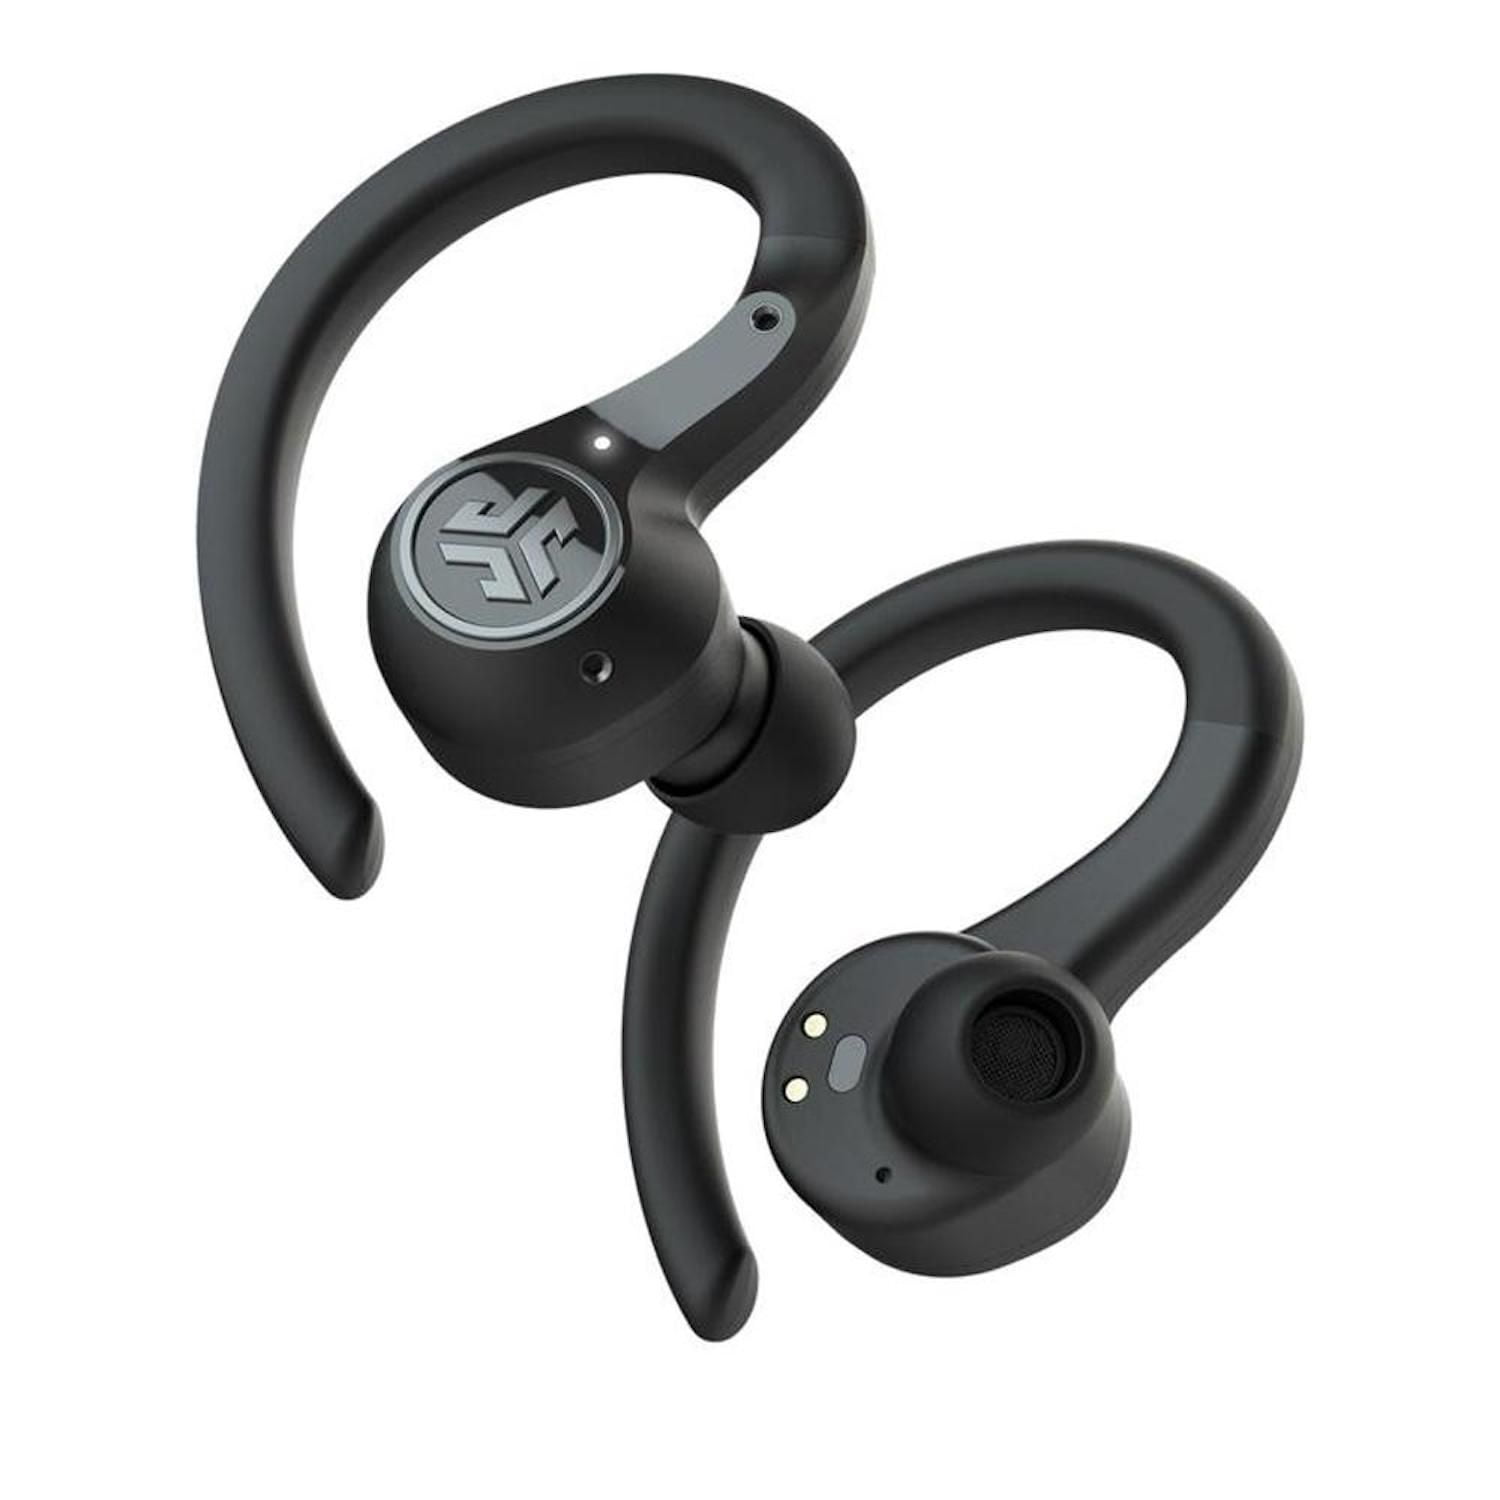 Special Offers for Wireless Bluetooth Earphones by epic